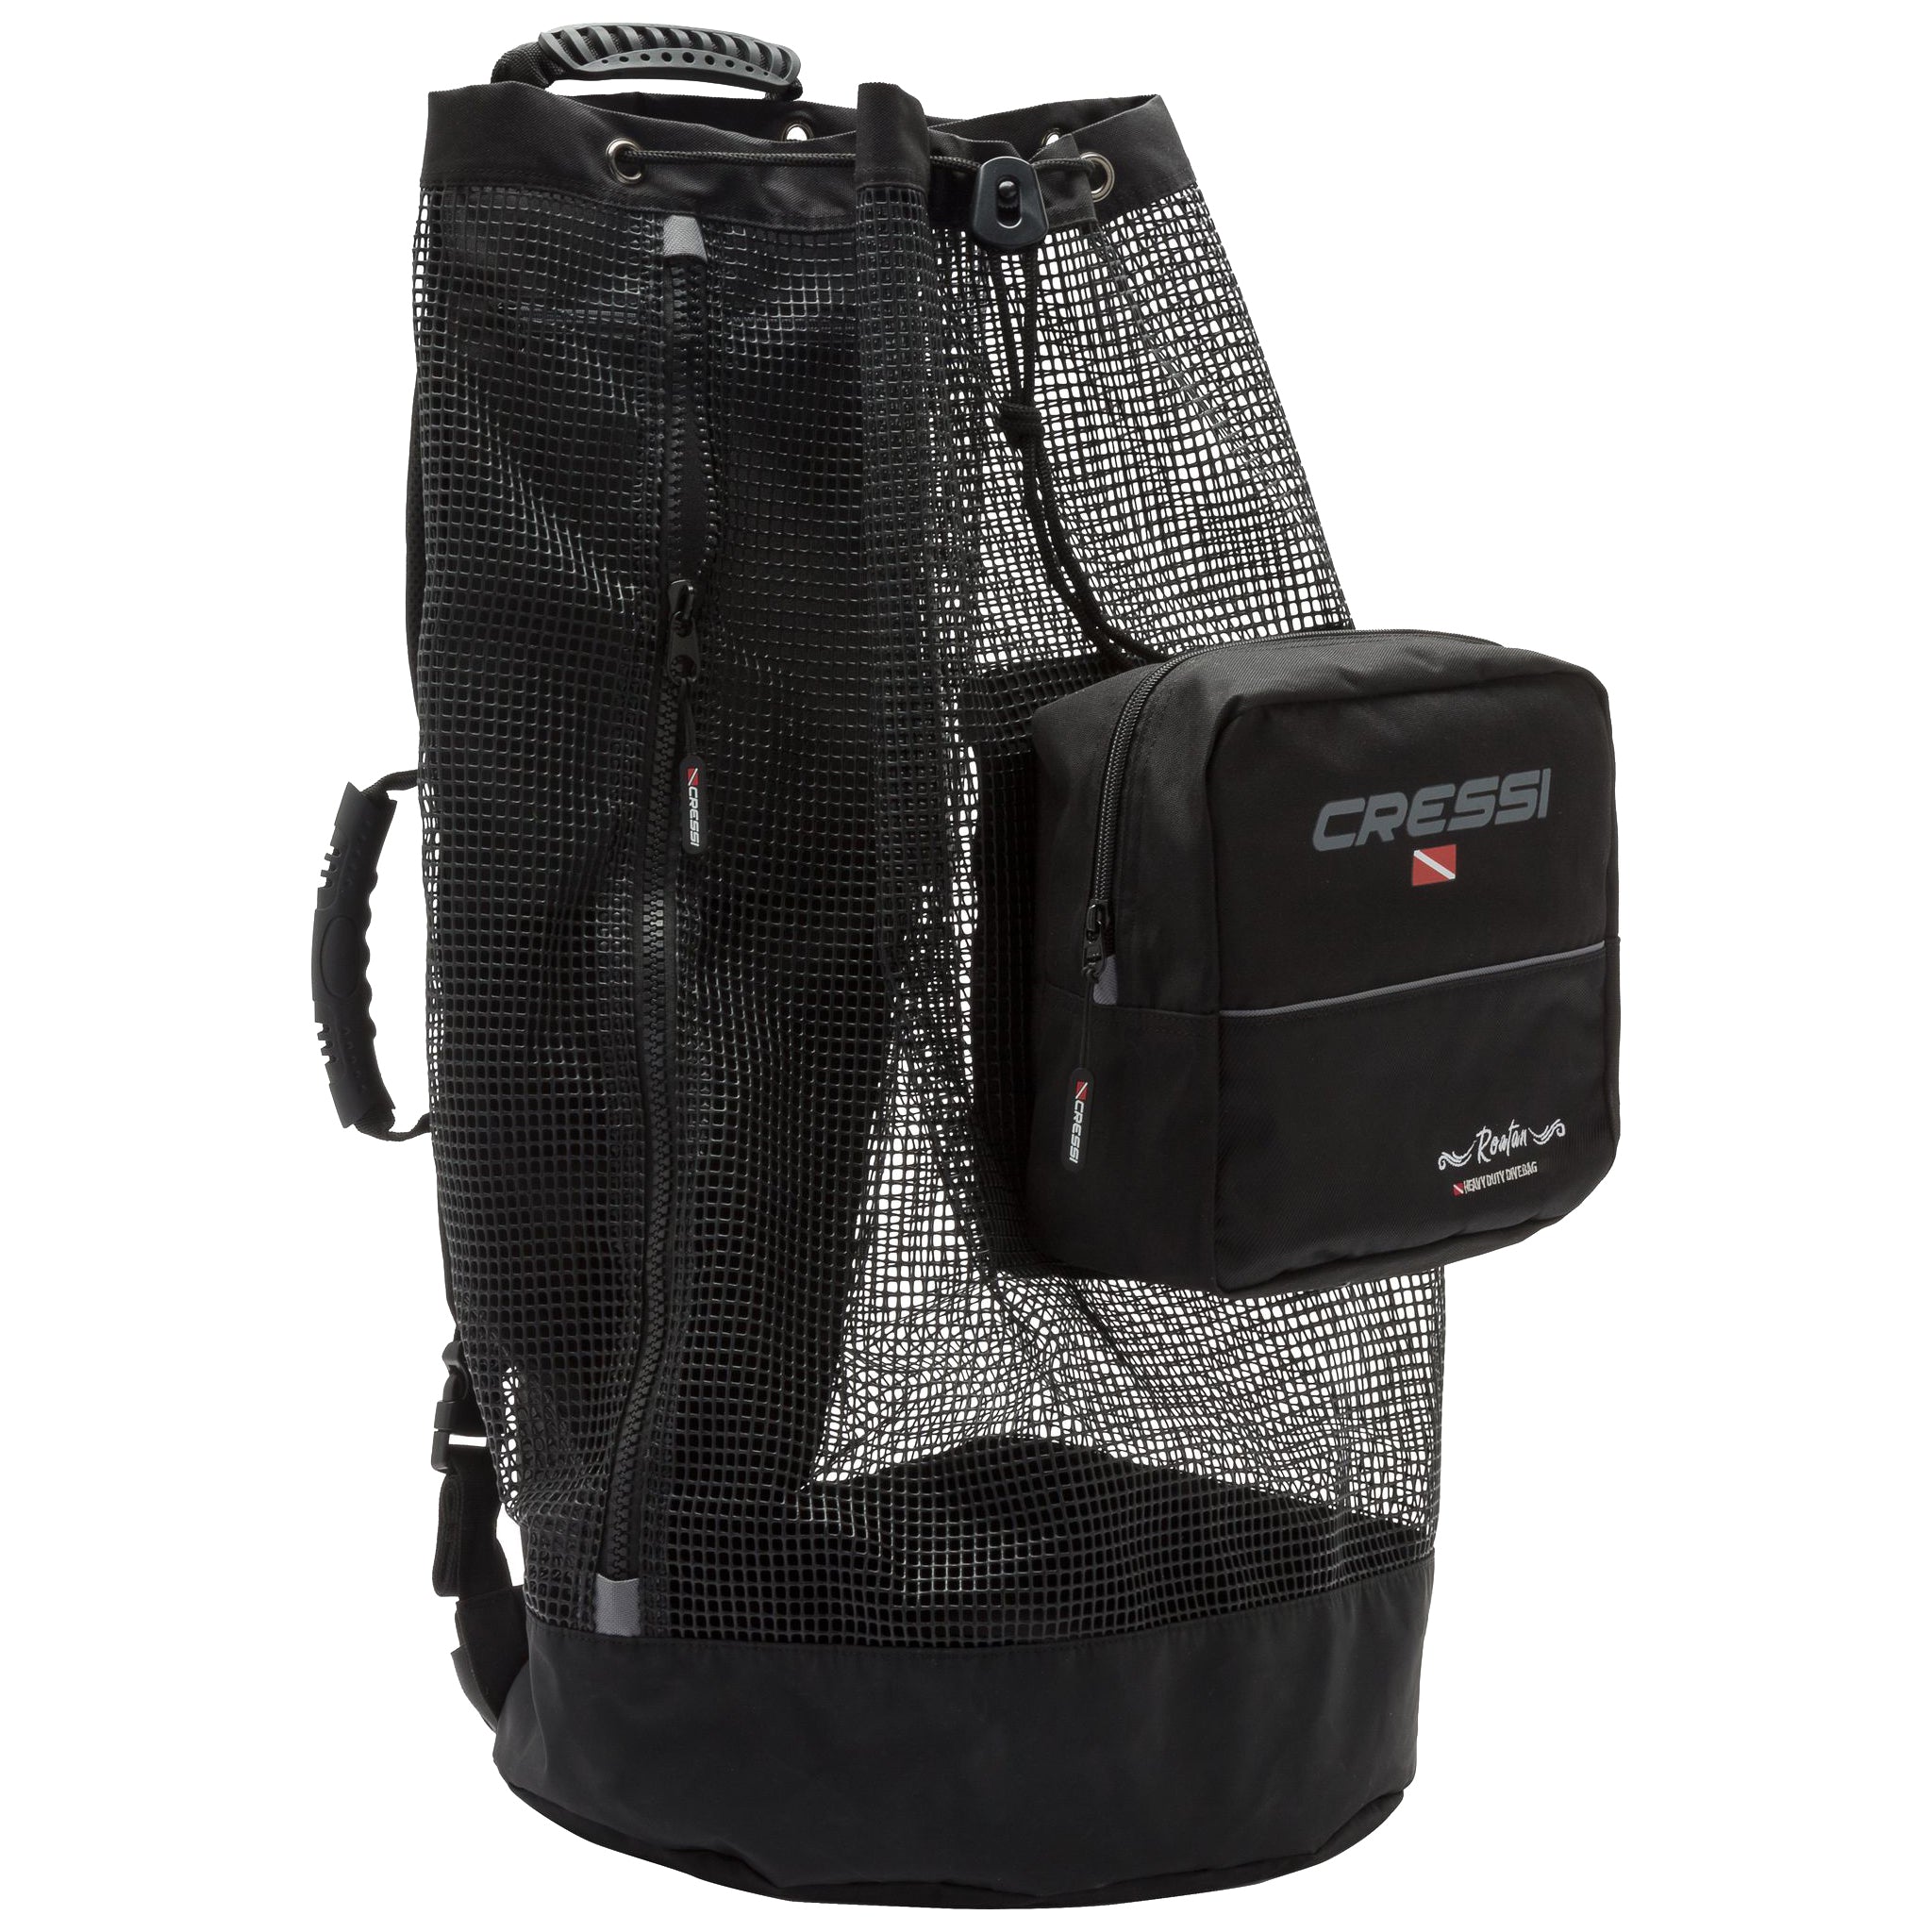 Cressi Roatan 123L Mesh Dive Backpack | Empty showing size zip entry